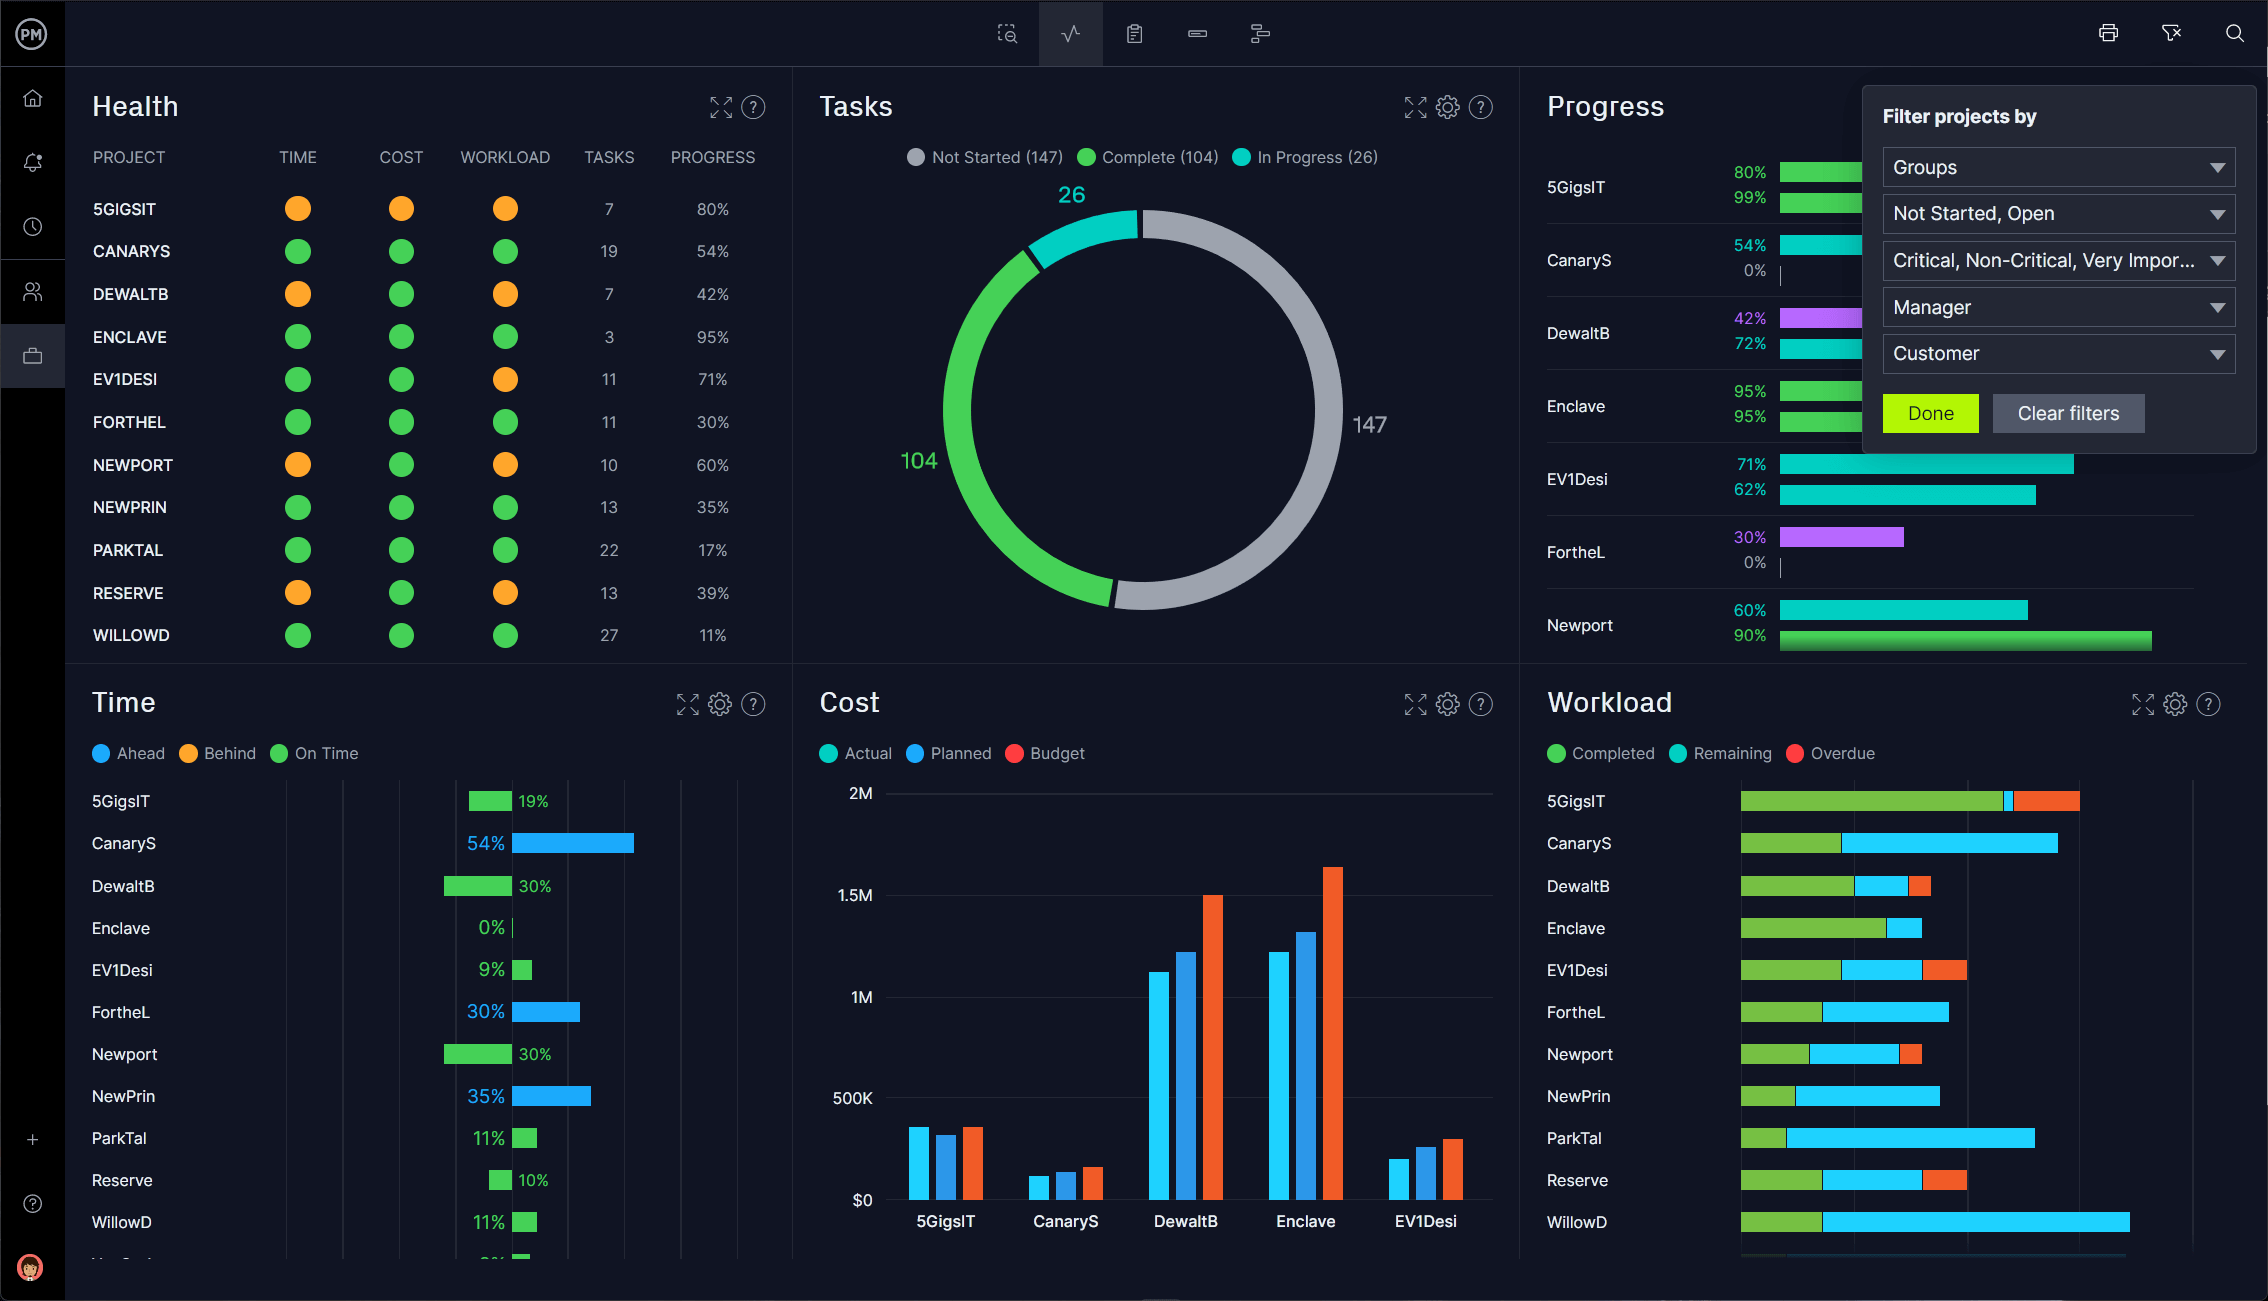 ProjectManager’s dashboard view, which shows six key metrics on a project